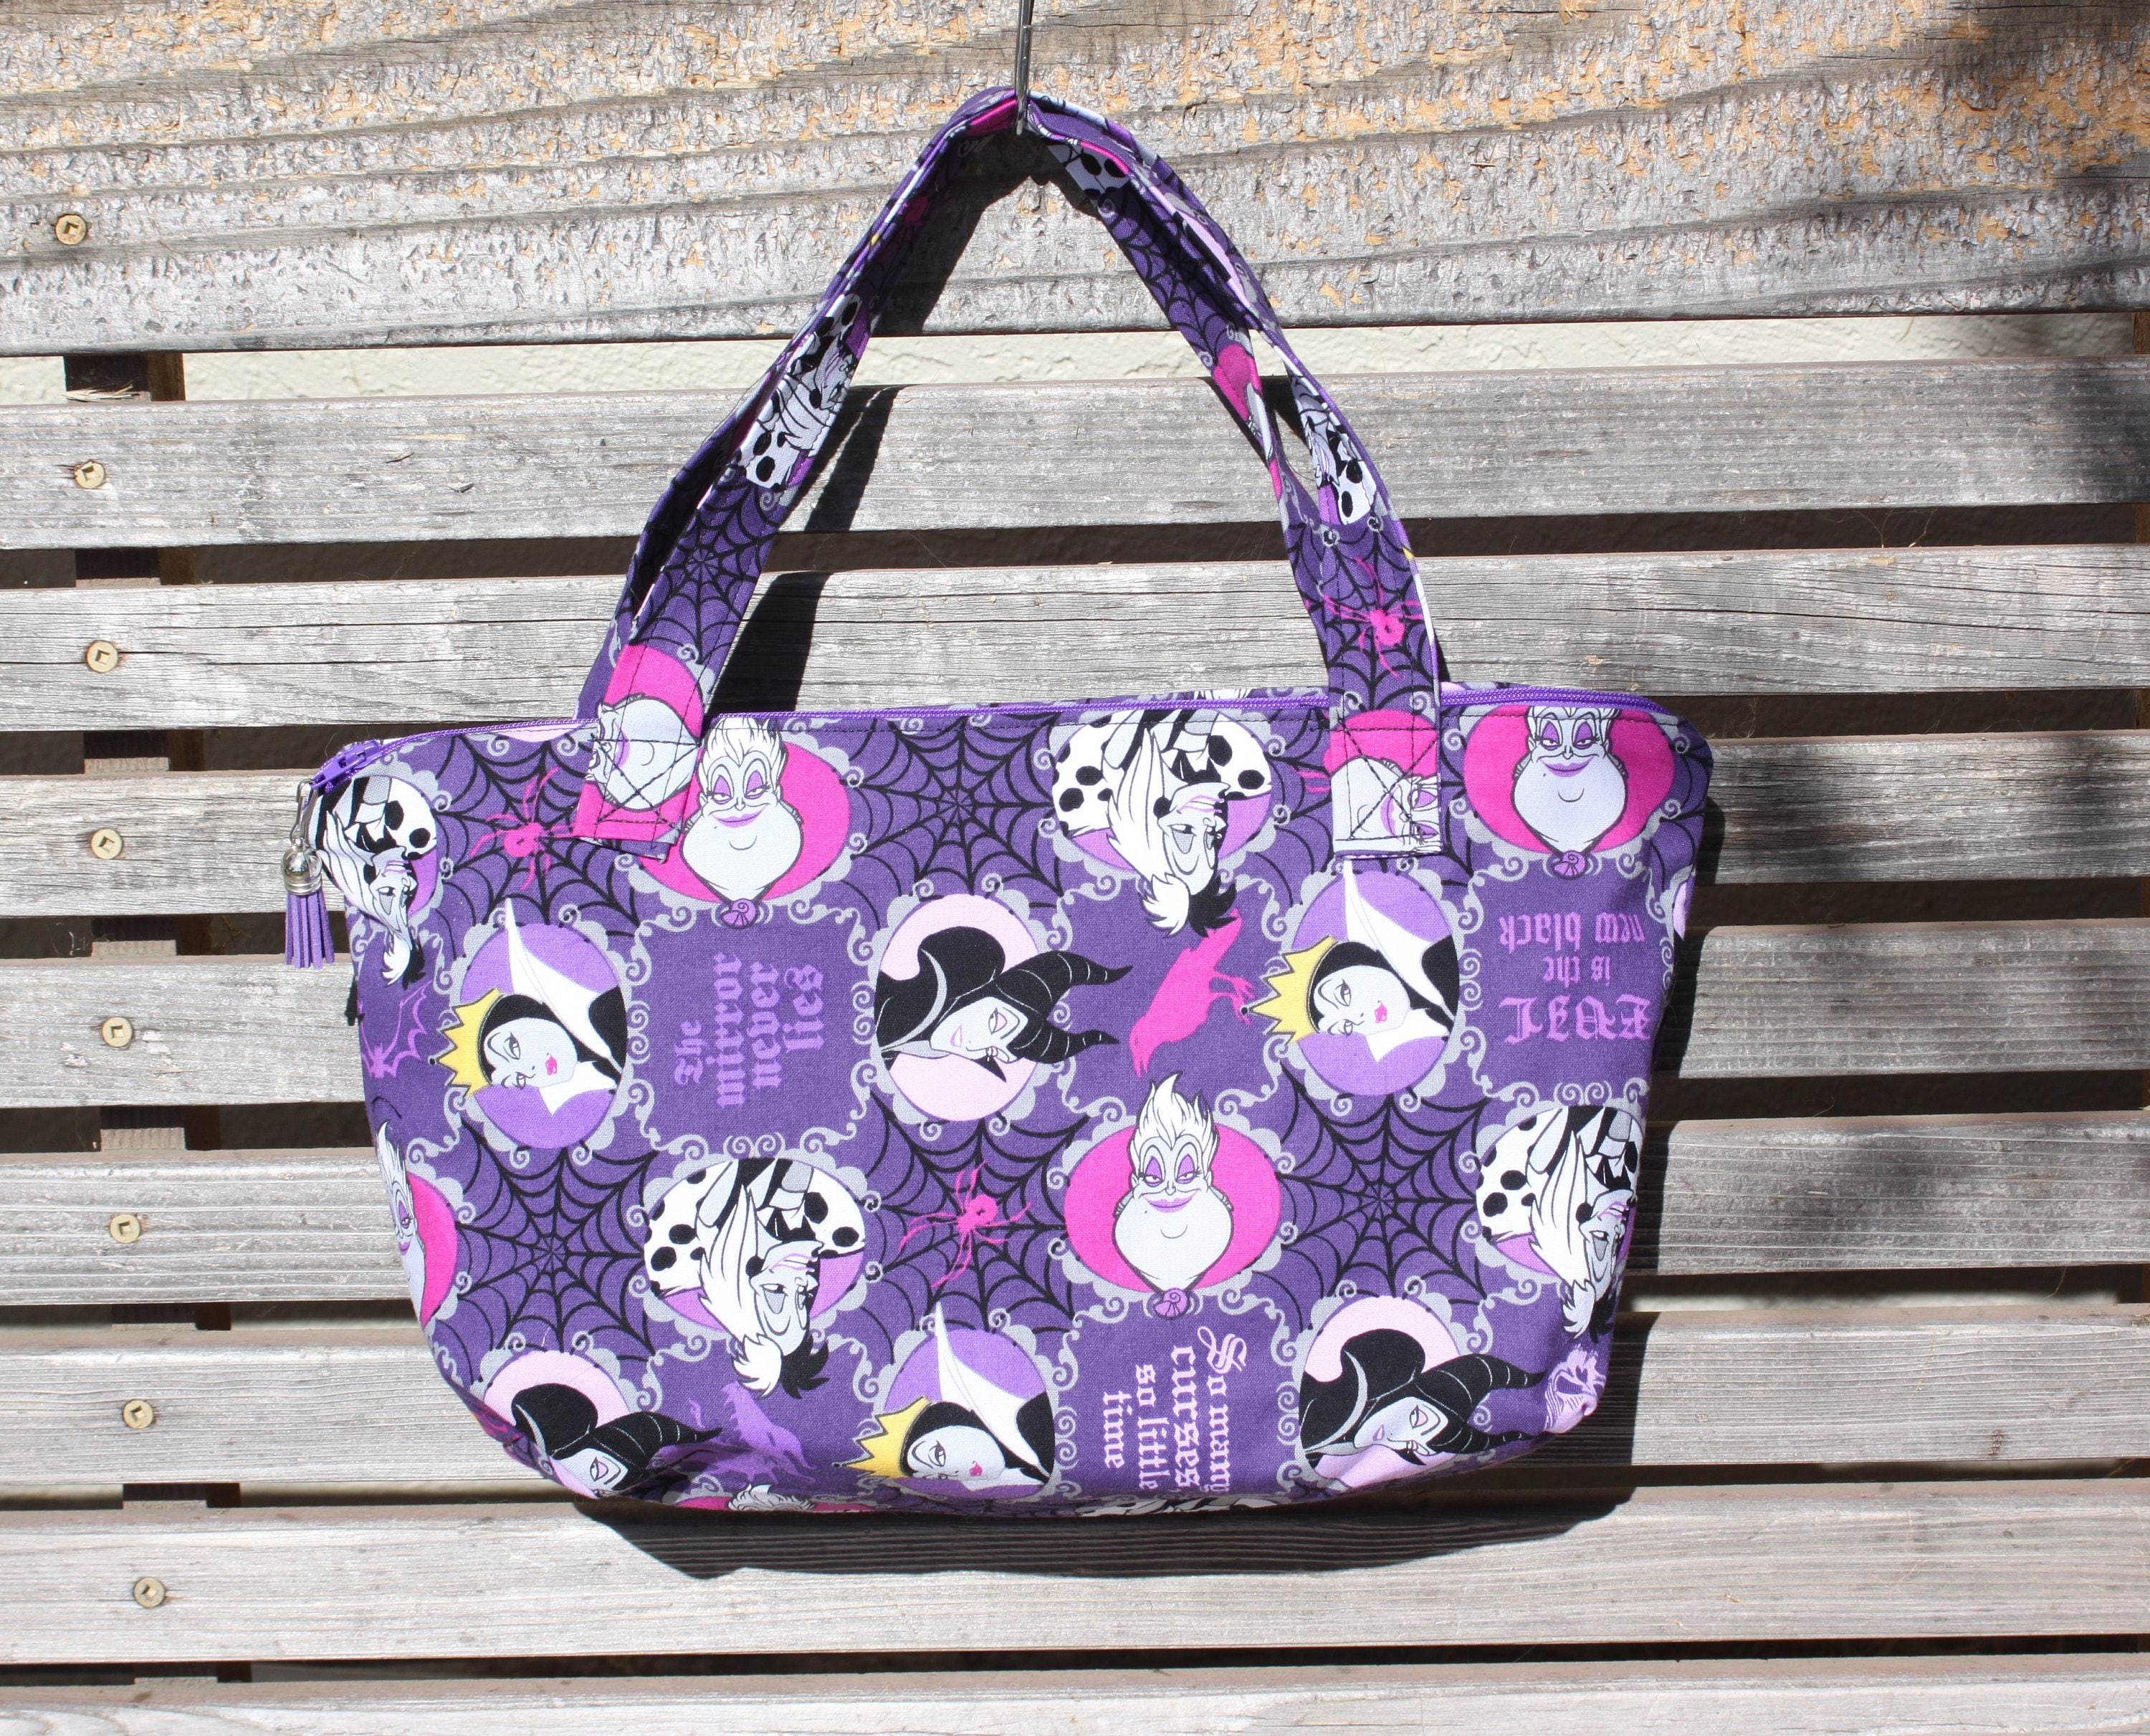 Disney Villains fabric, vinyl lined bag, perfect for snack or lunch,  cosmetics, makeup or even as a unique purse